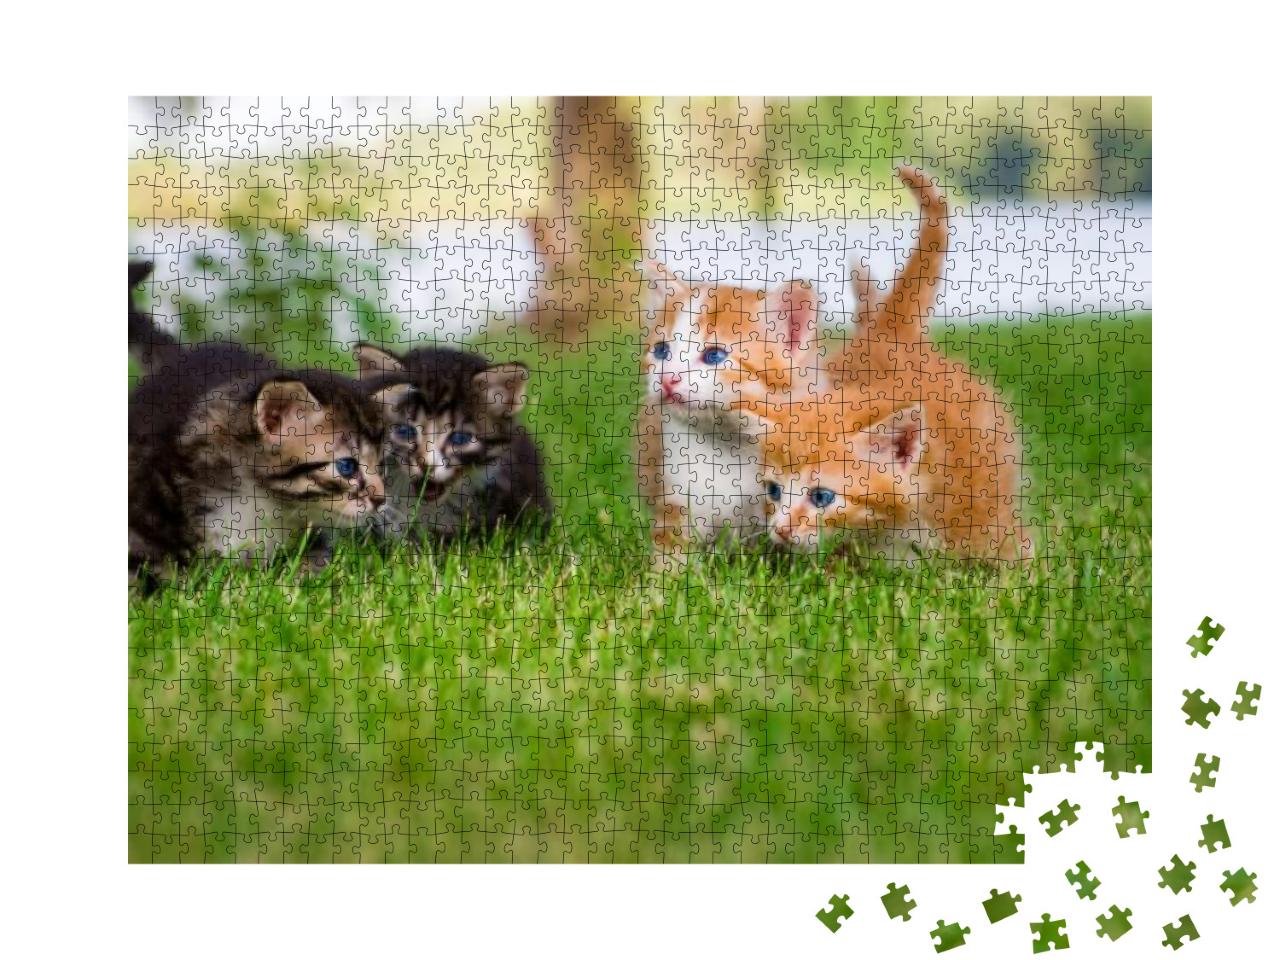 Four Little Kittens Playing in Garden Together... Jigsaw Puzzle with 1000 pieces